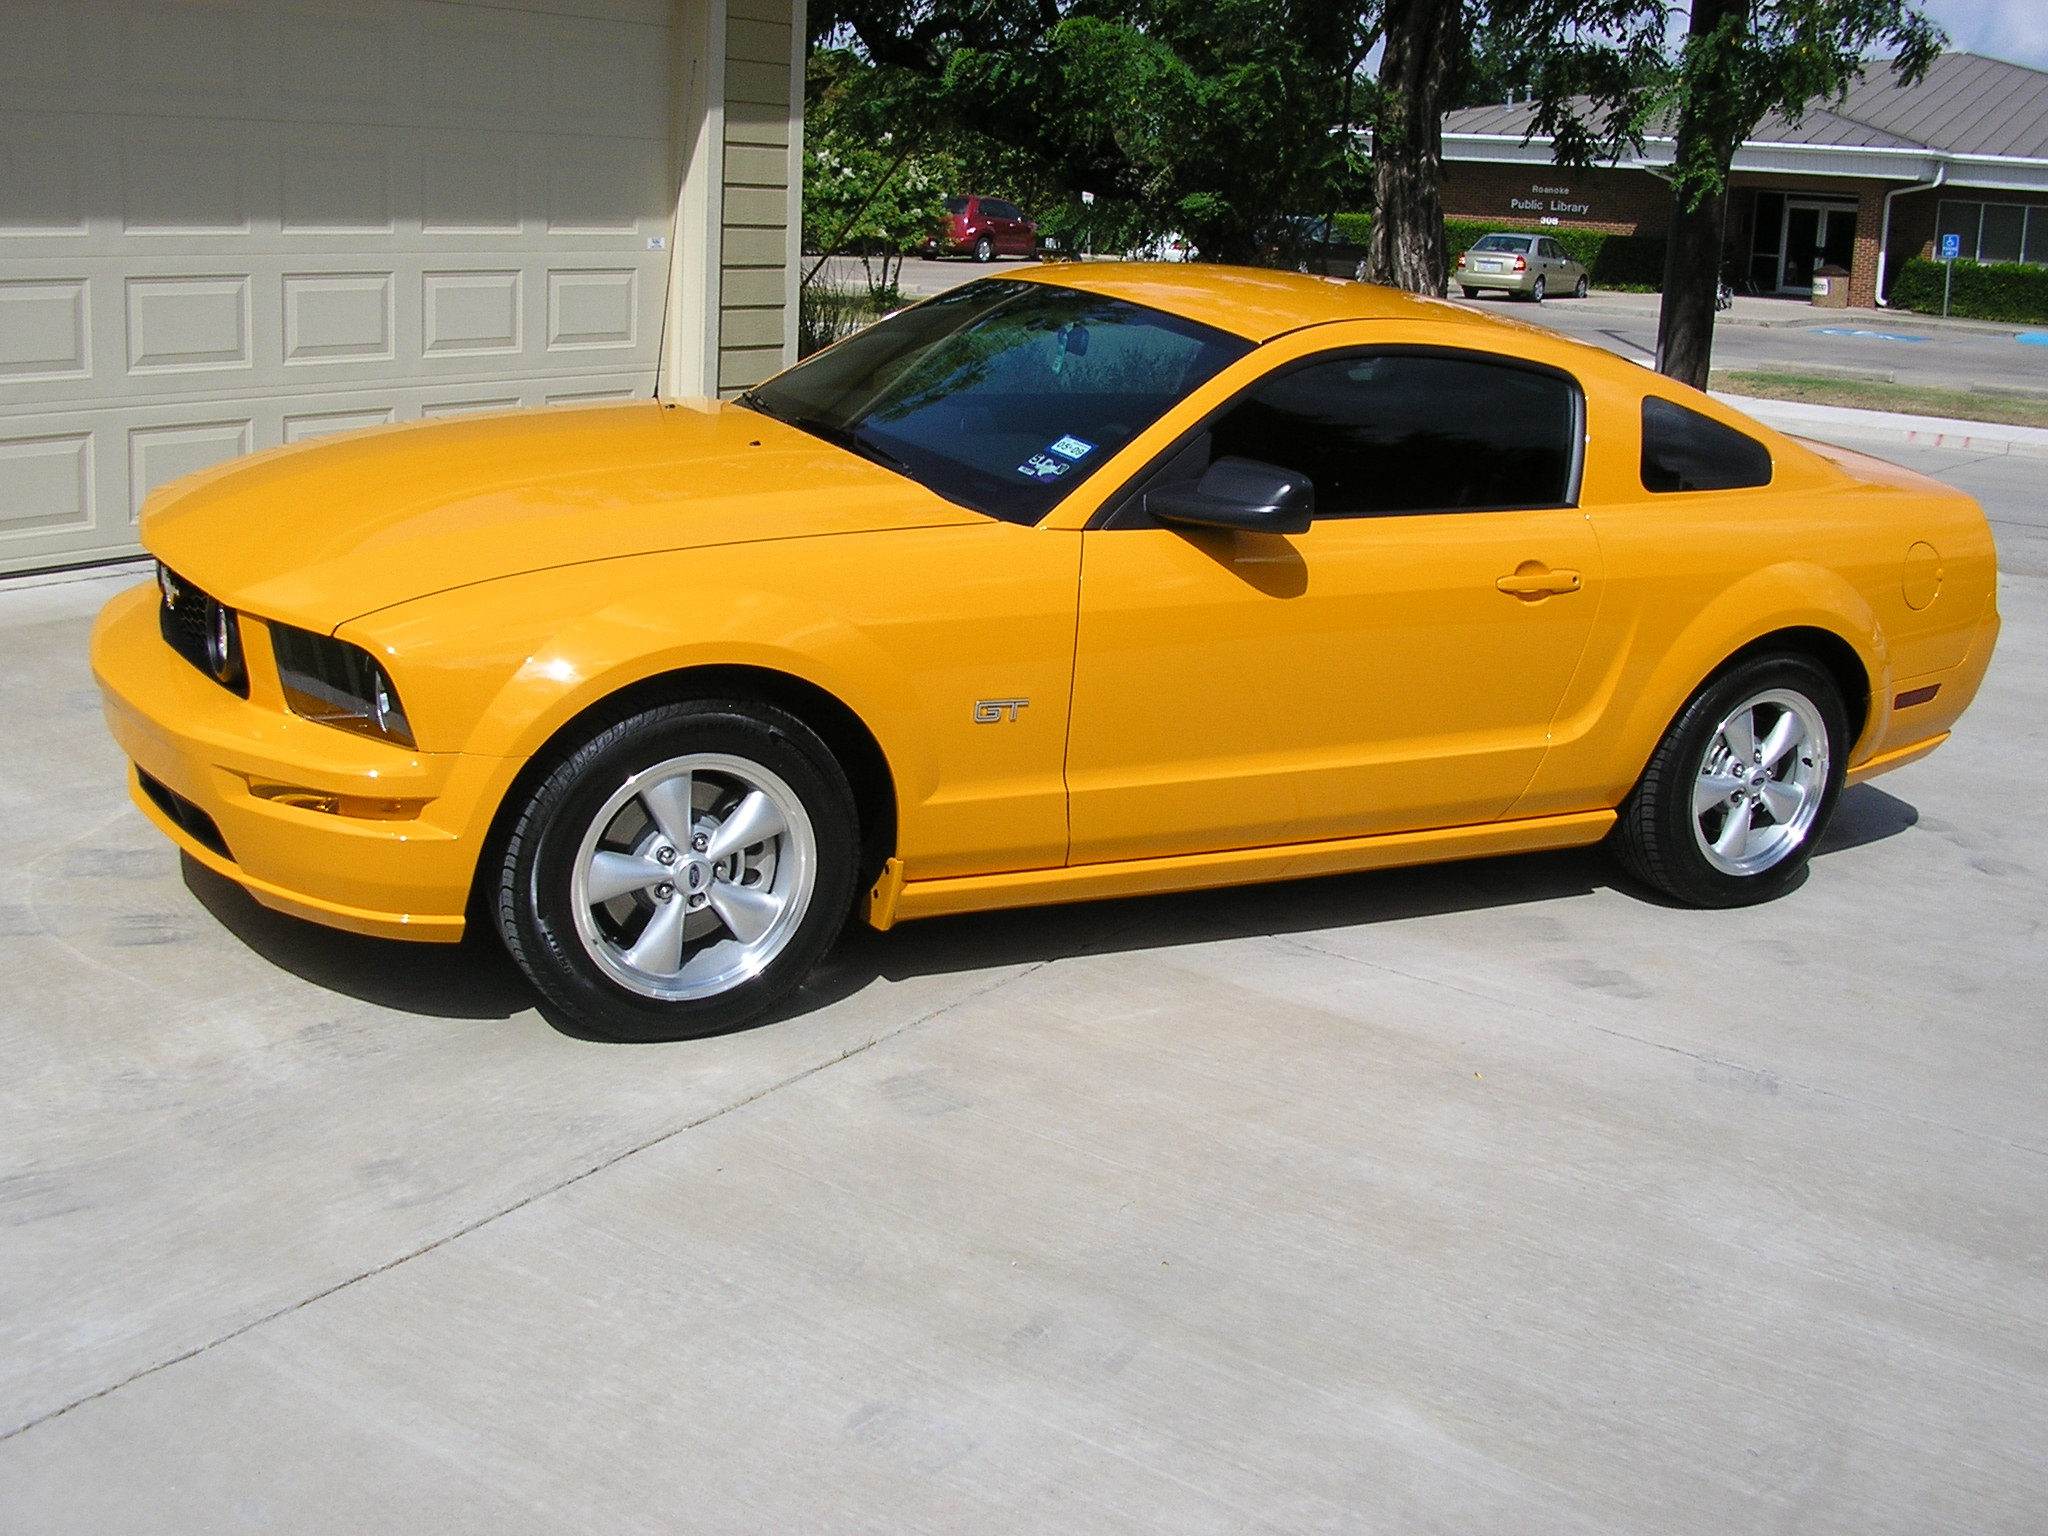 2008 Ford mustang gt quarter mile time #10